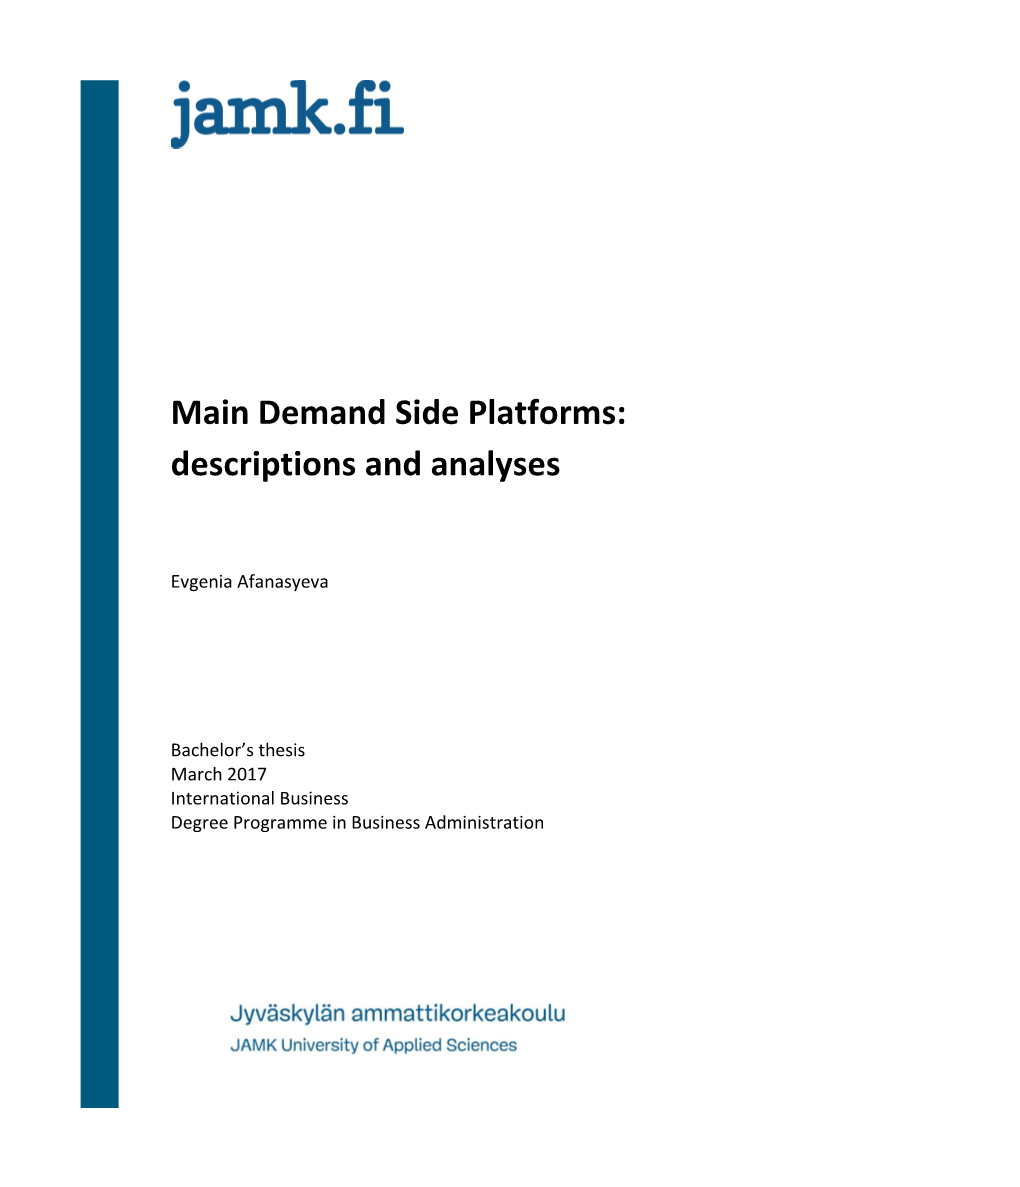 Main Demand Side Platforms: Descriptions and Analyses